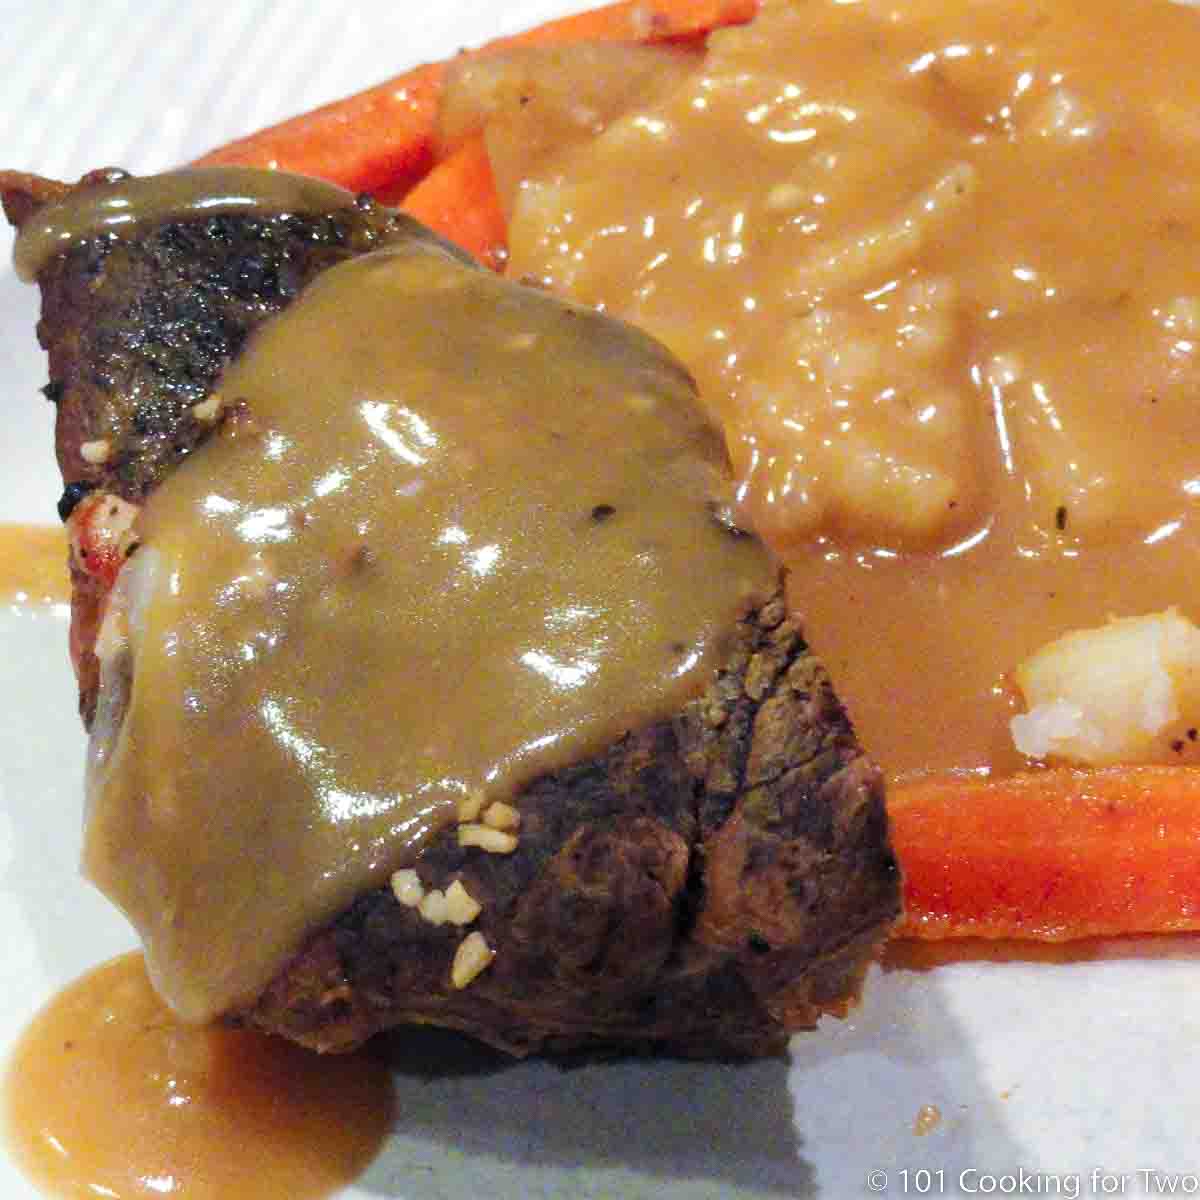 https://www.101cookingfortwo.com/wp-content/uploads/2011/02/pot-roast-on-plate-with-potatoes-and-gravy.jpg